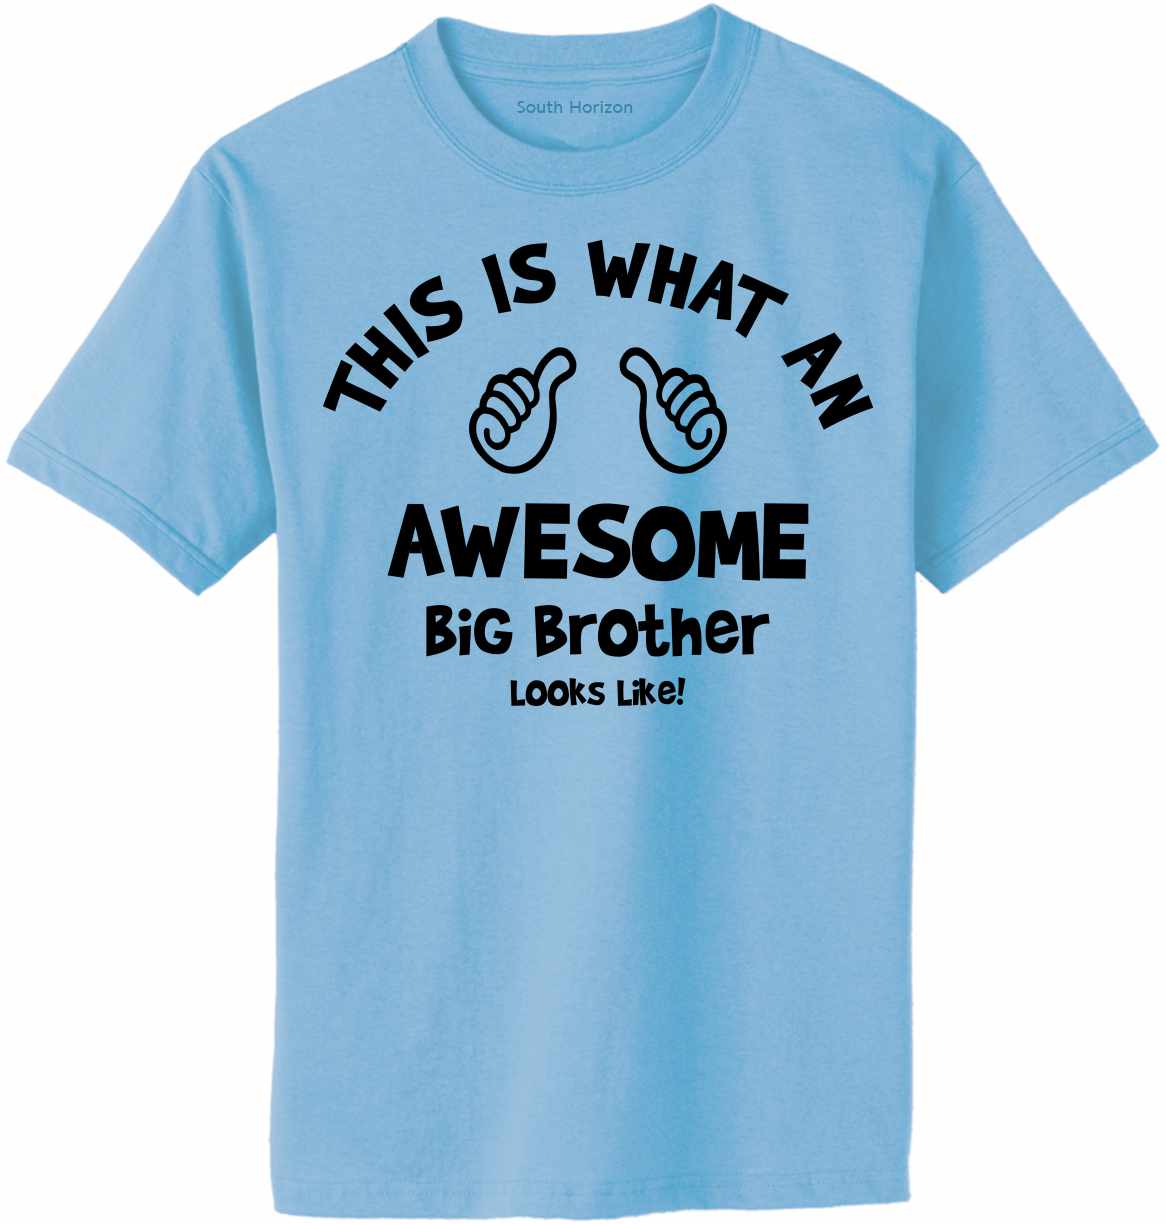 This is What an AWESOME BIG BROTHER Looks Like Adult T-Shirt (#964-1)